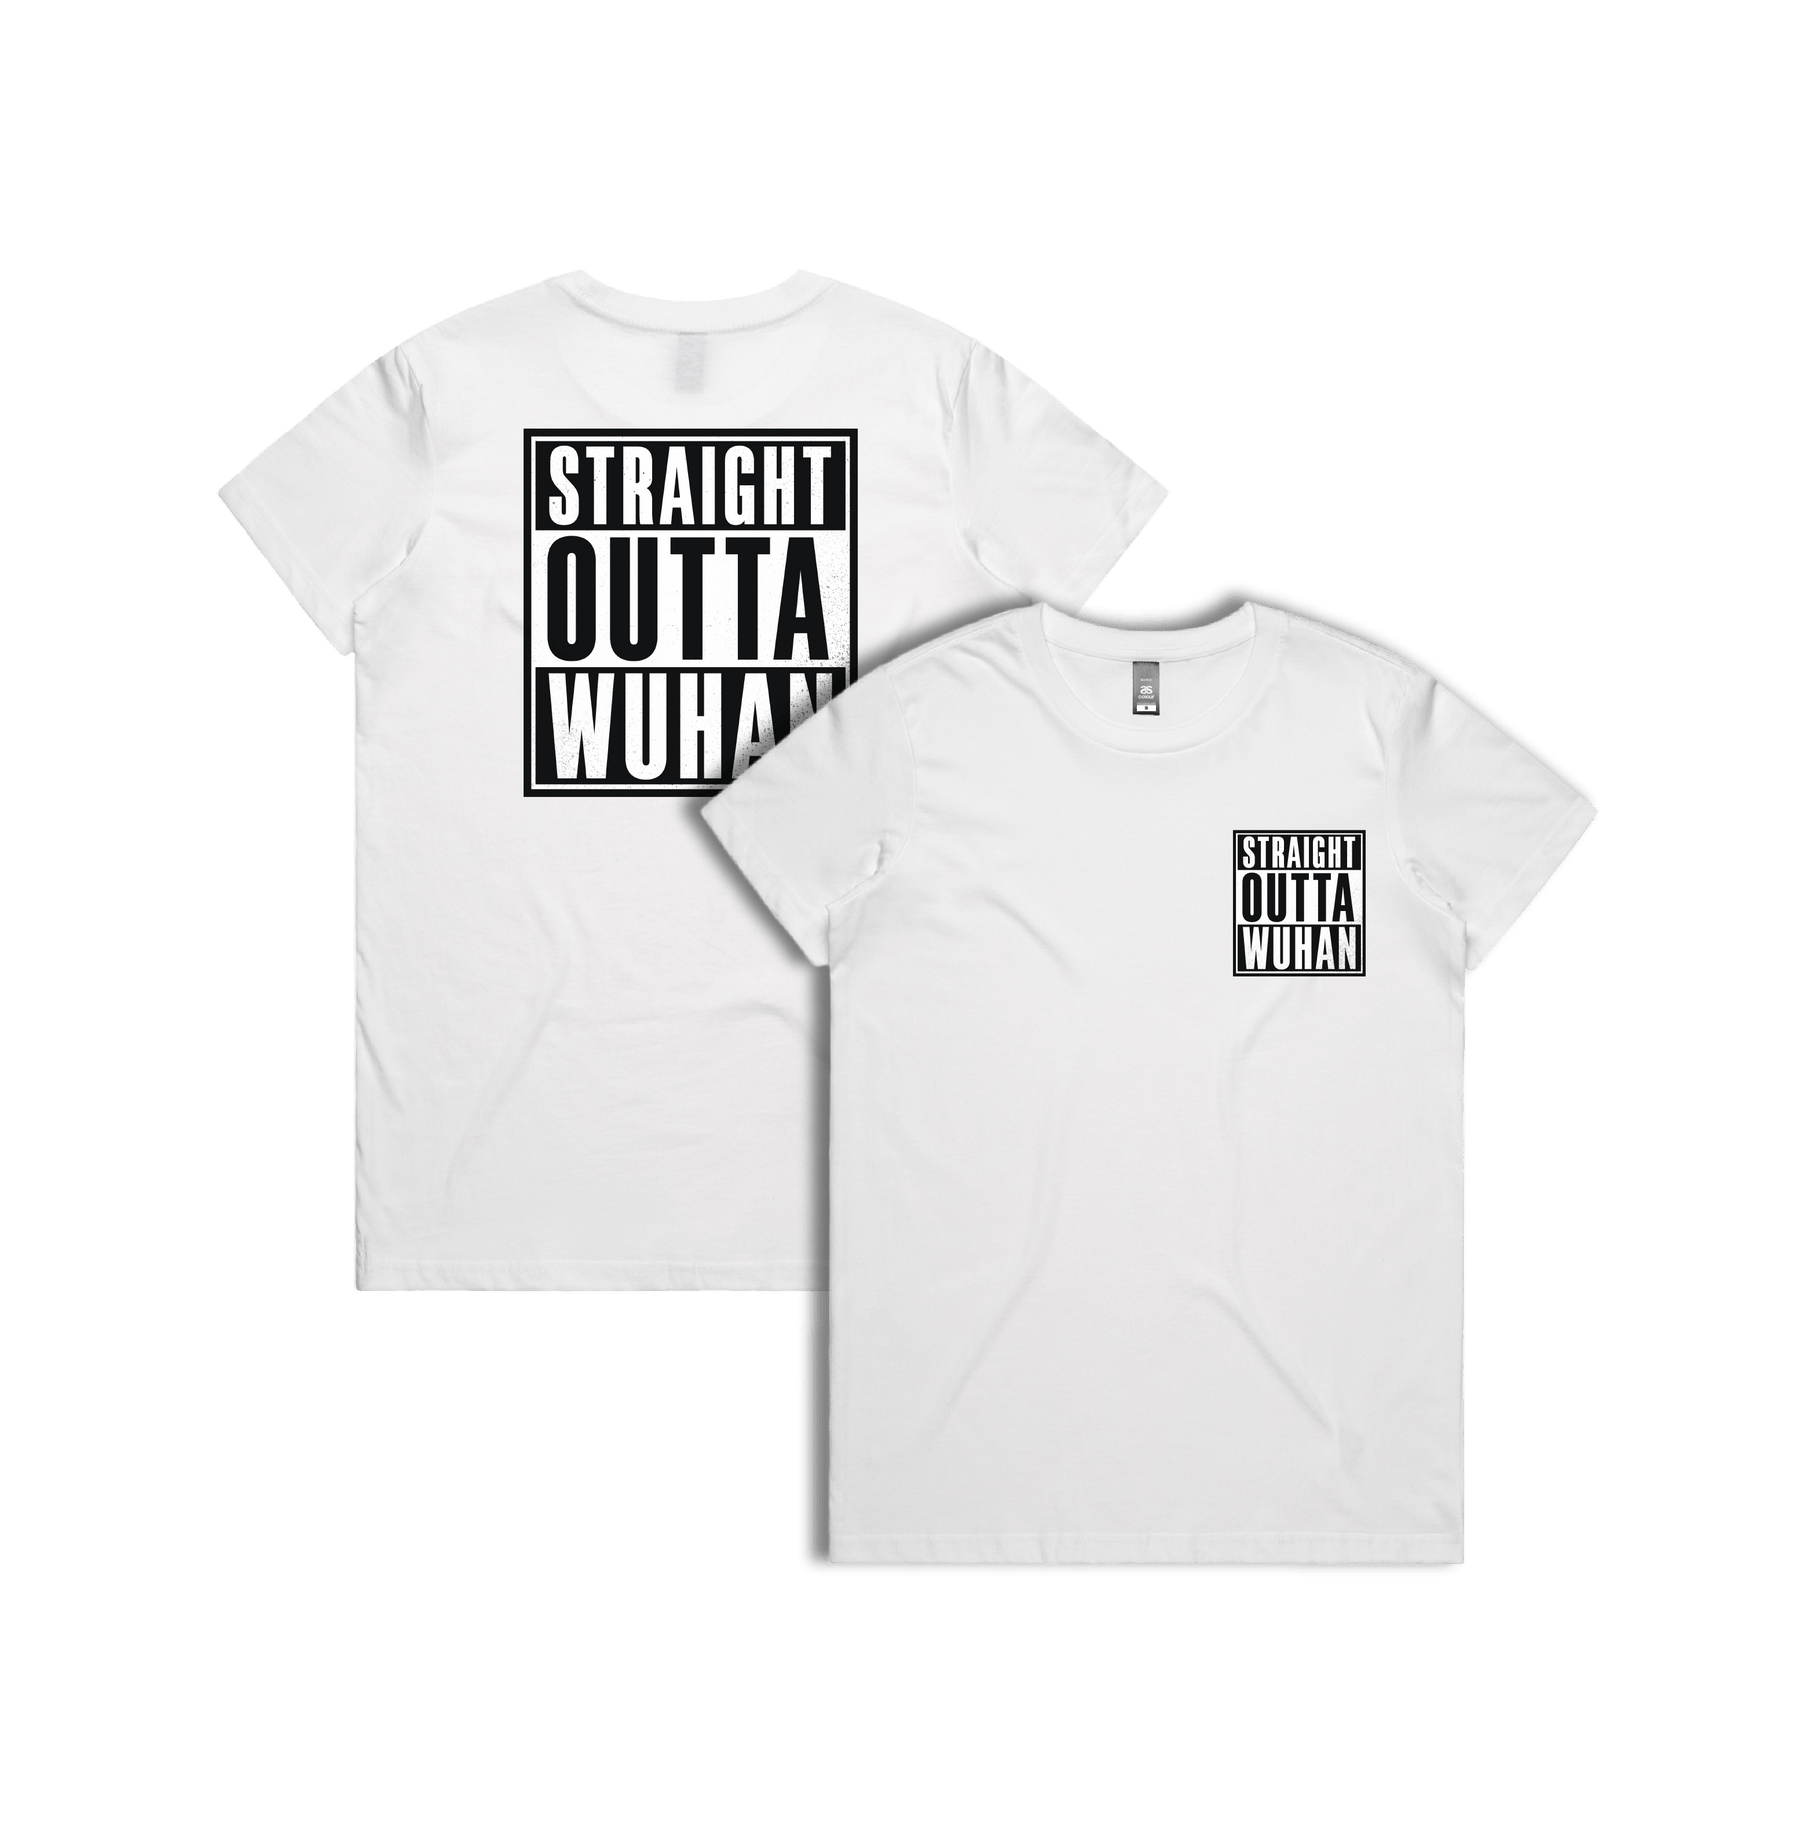 XS / White / Small Front & Large Back Design Straight Outta Wuhan ✊🏾 - Women's T Shirt